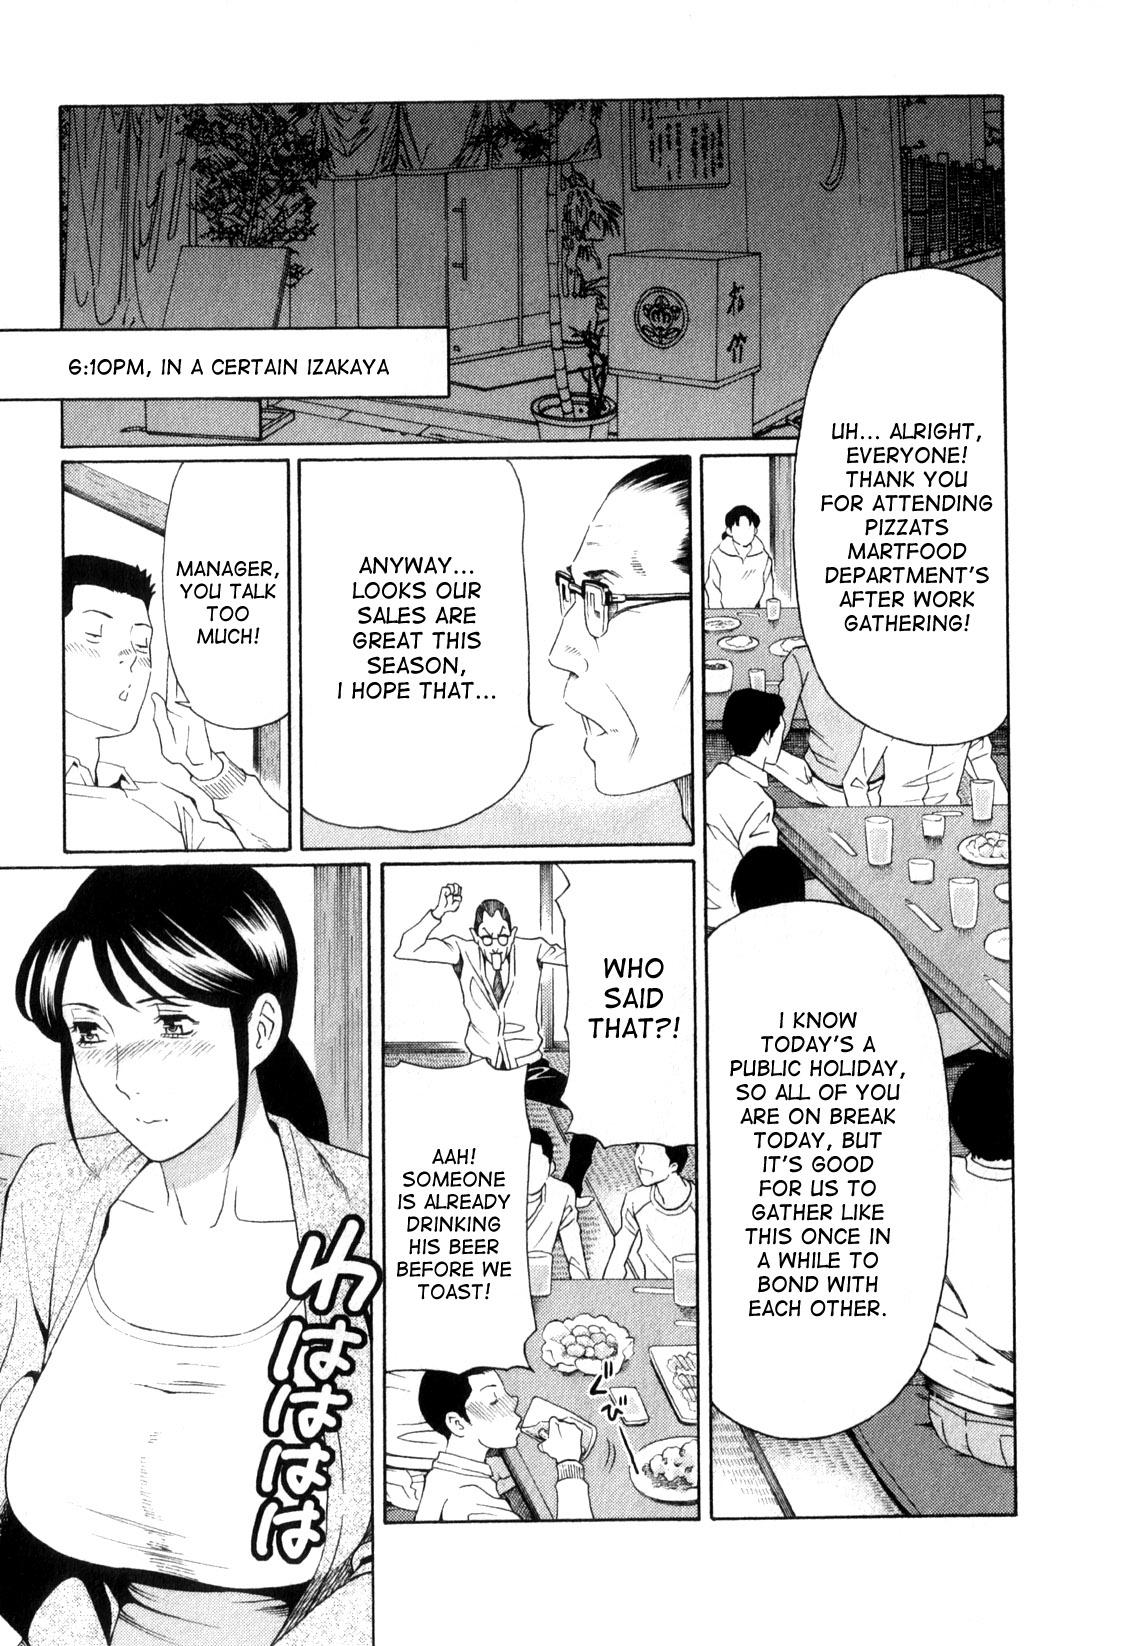 Ride Ingi no Hate 1 Ch. 1-6 Indonesia - Page 10